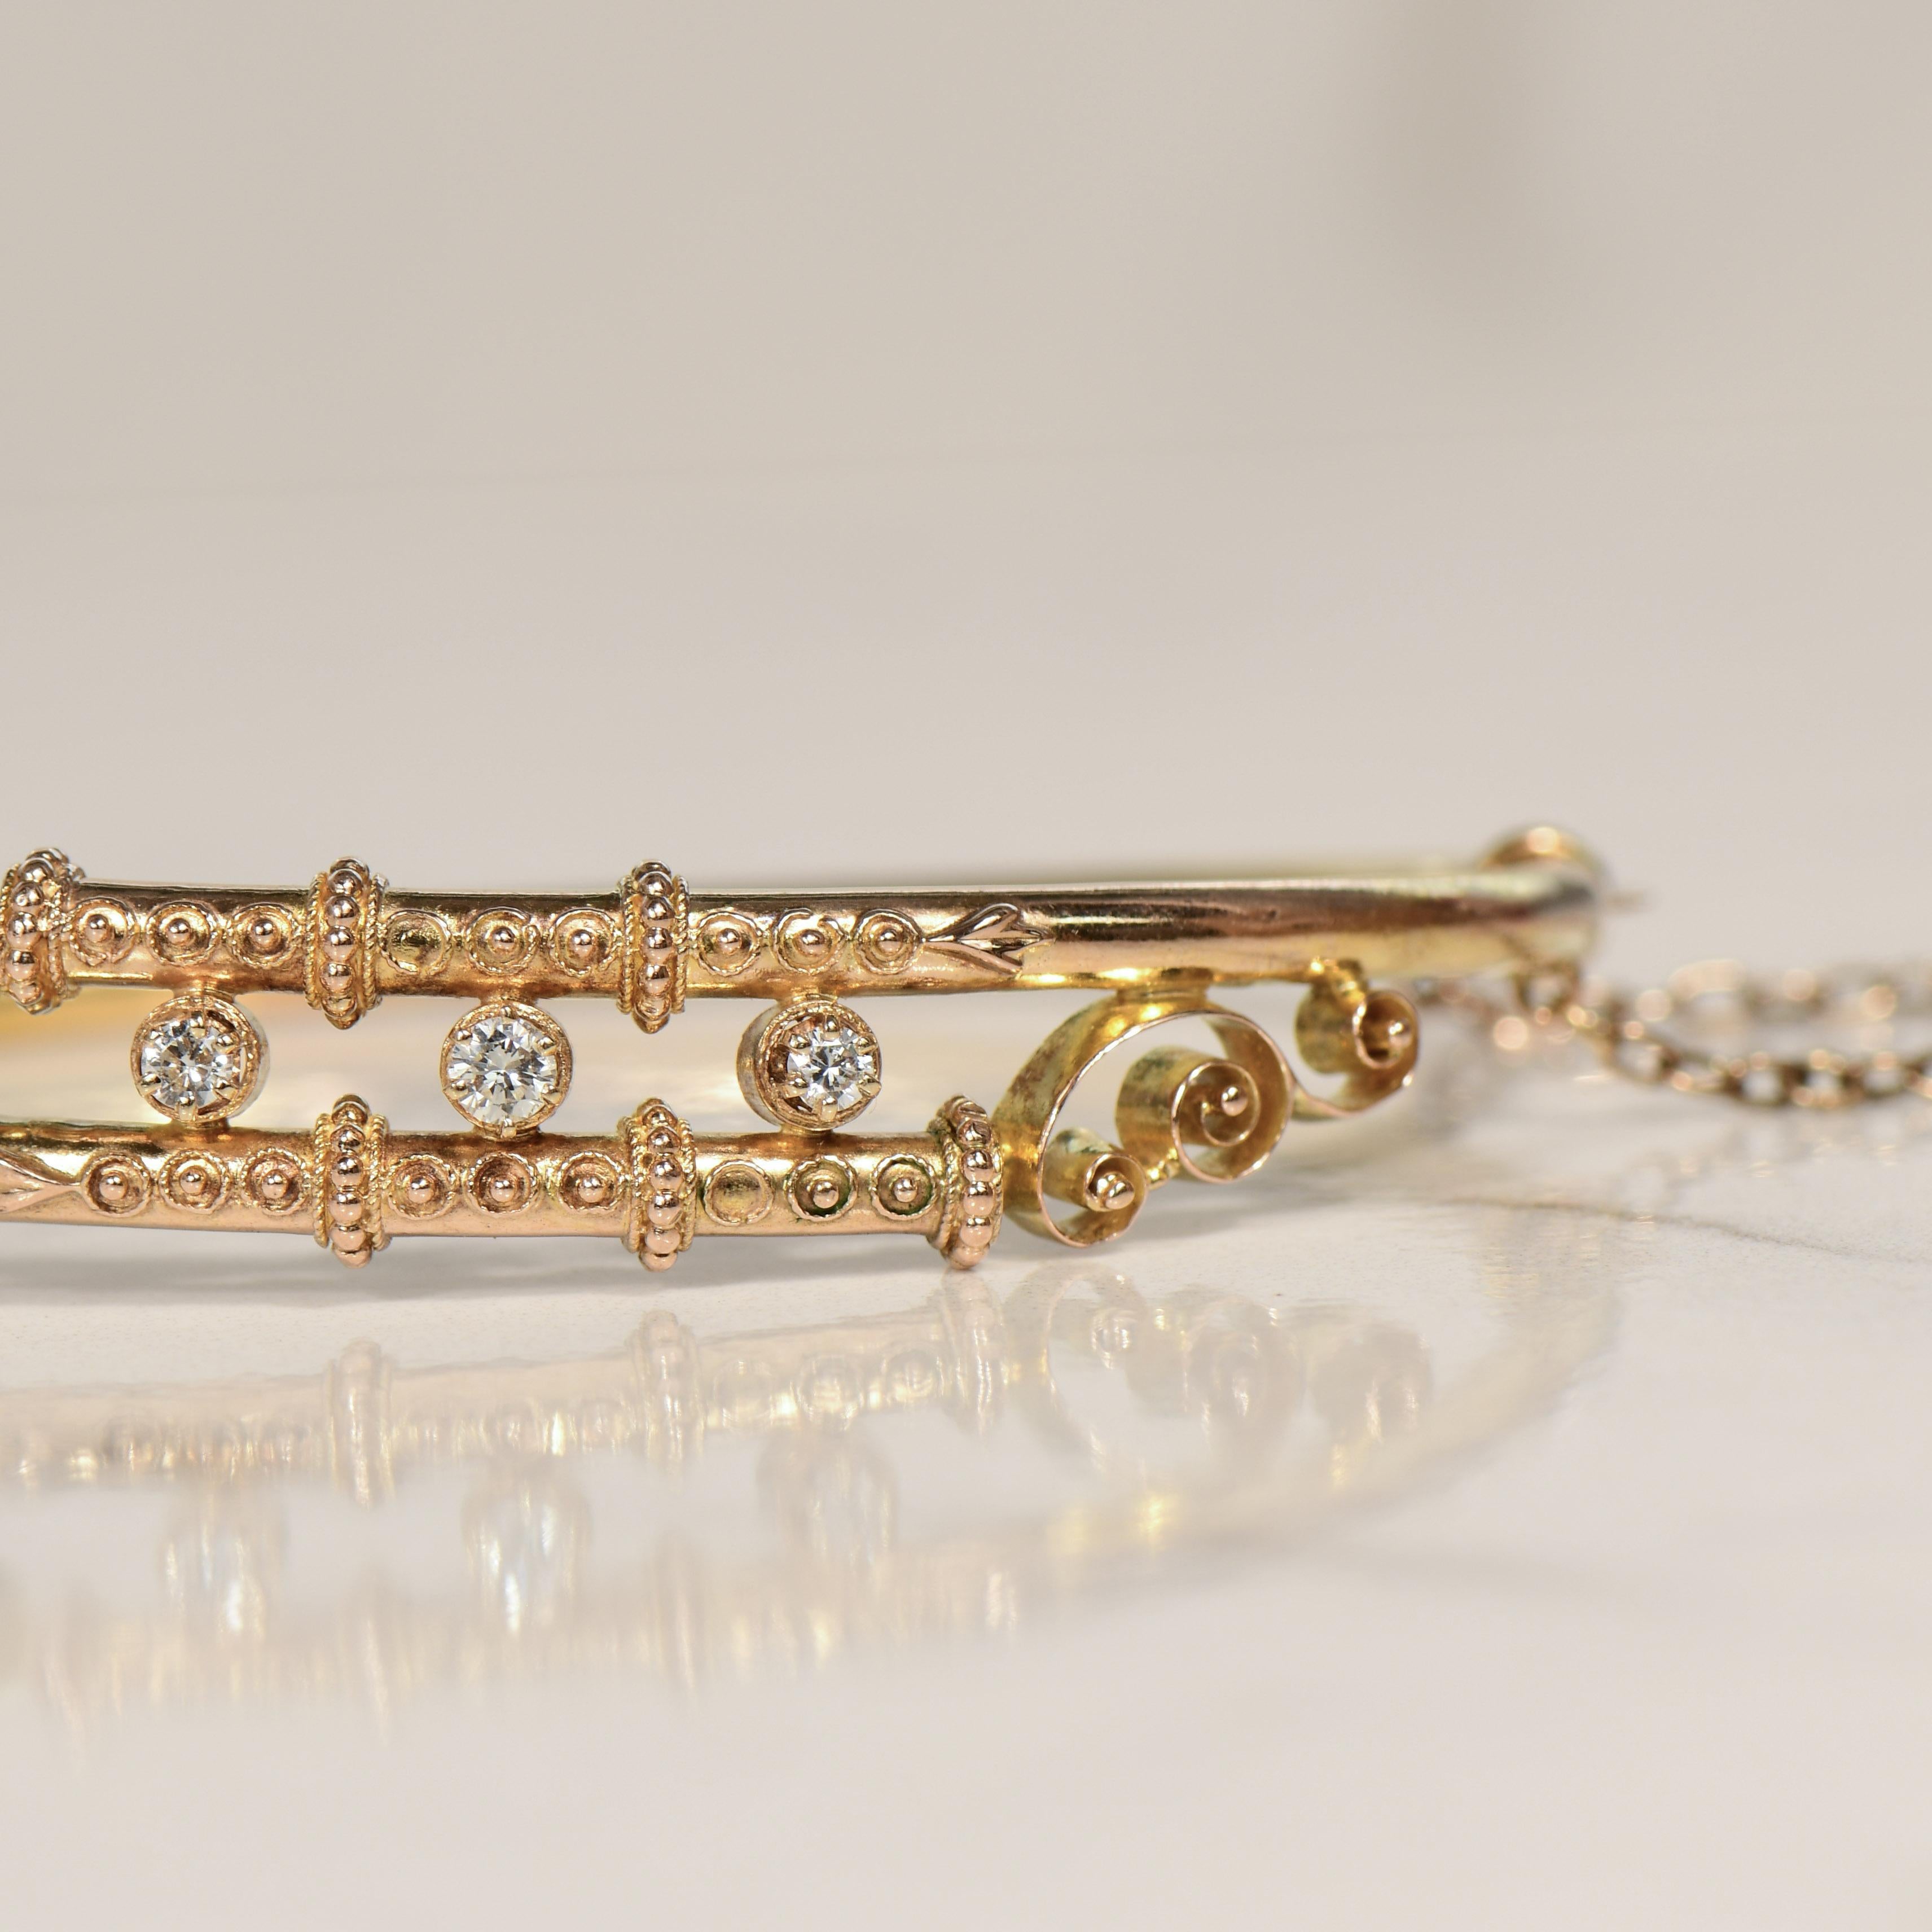 Behold a magnificent piece of history with this 14K antique diamond bangle, a testament to the Etruscan Revival style, boasting a diamond bypass hinged design. This bracelet transports you back in time to an era when craftsmanship was paramount and